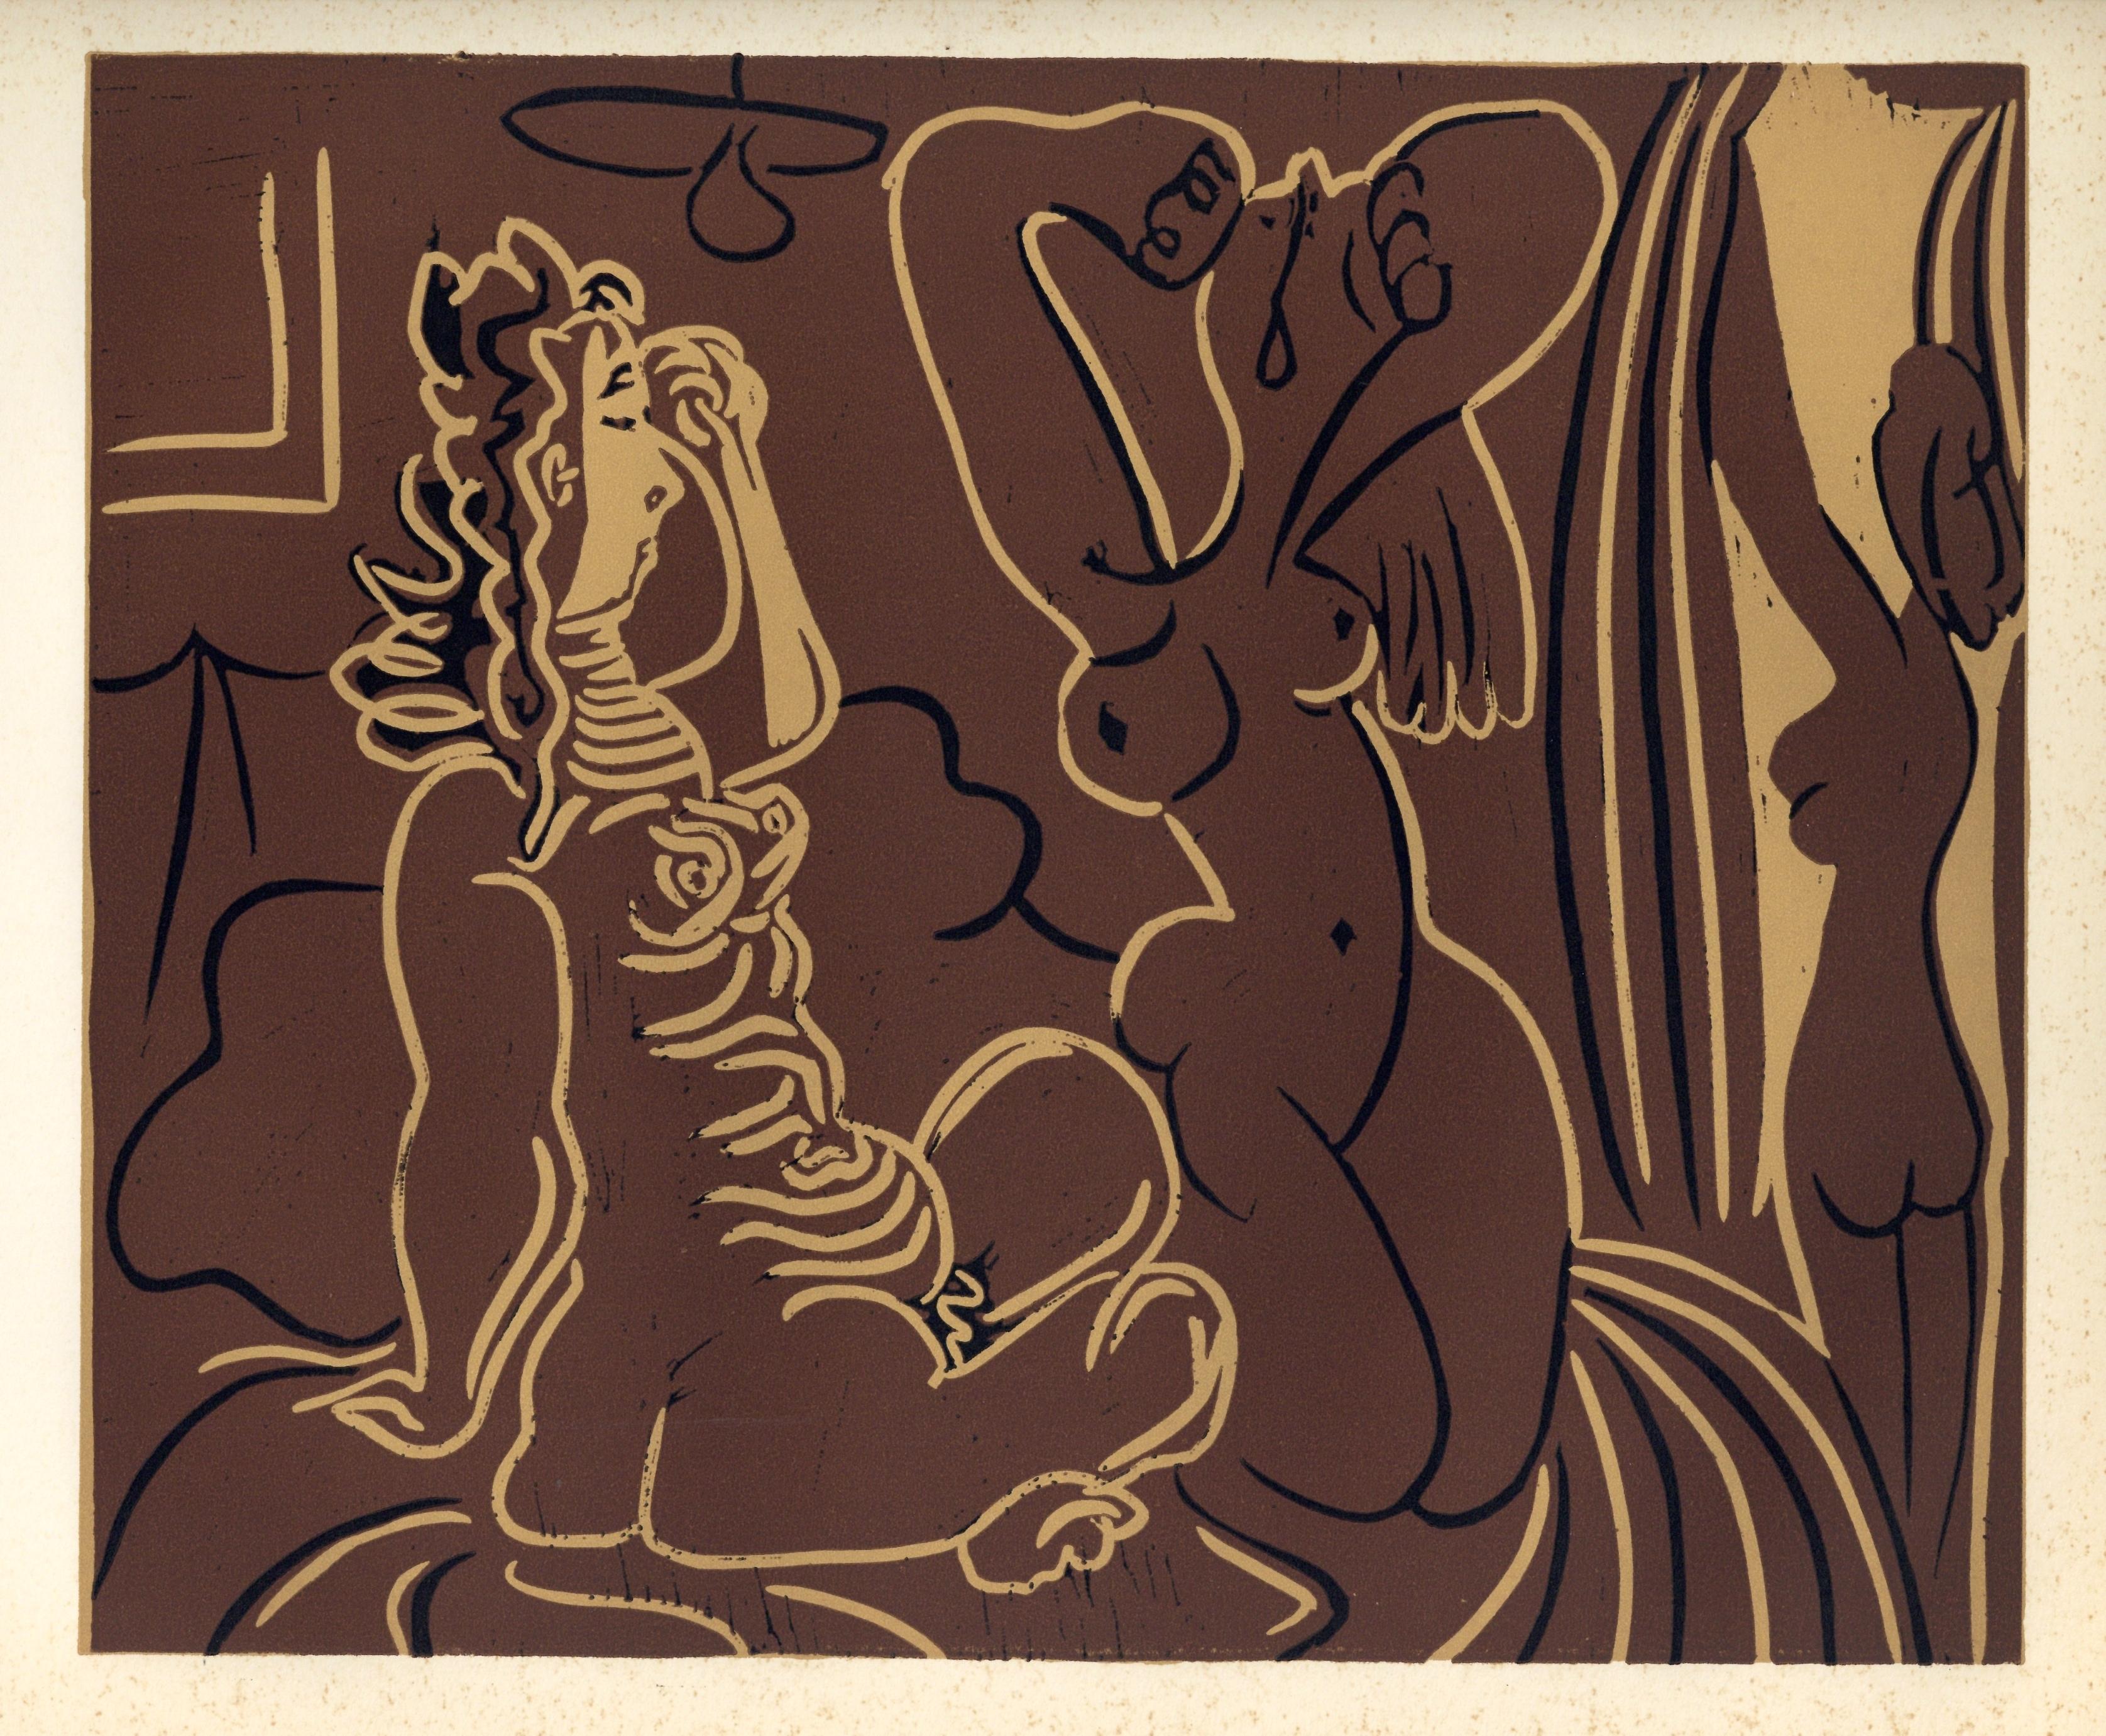 "Three Women" linocut - Print by (after) Pablo Picasso